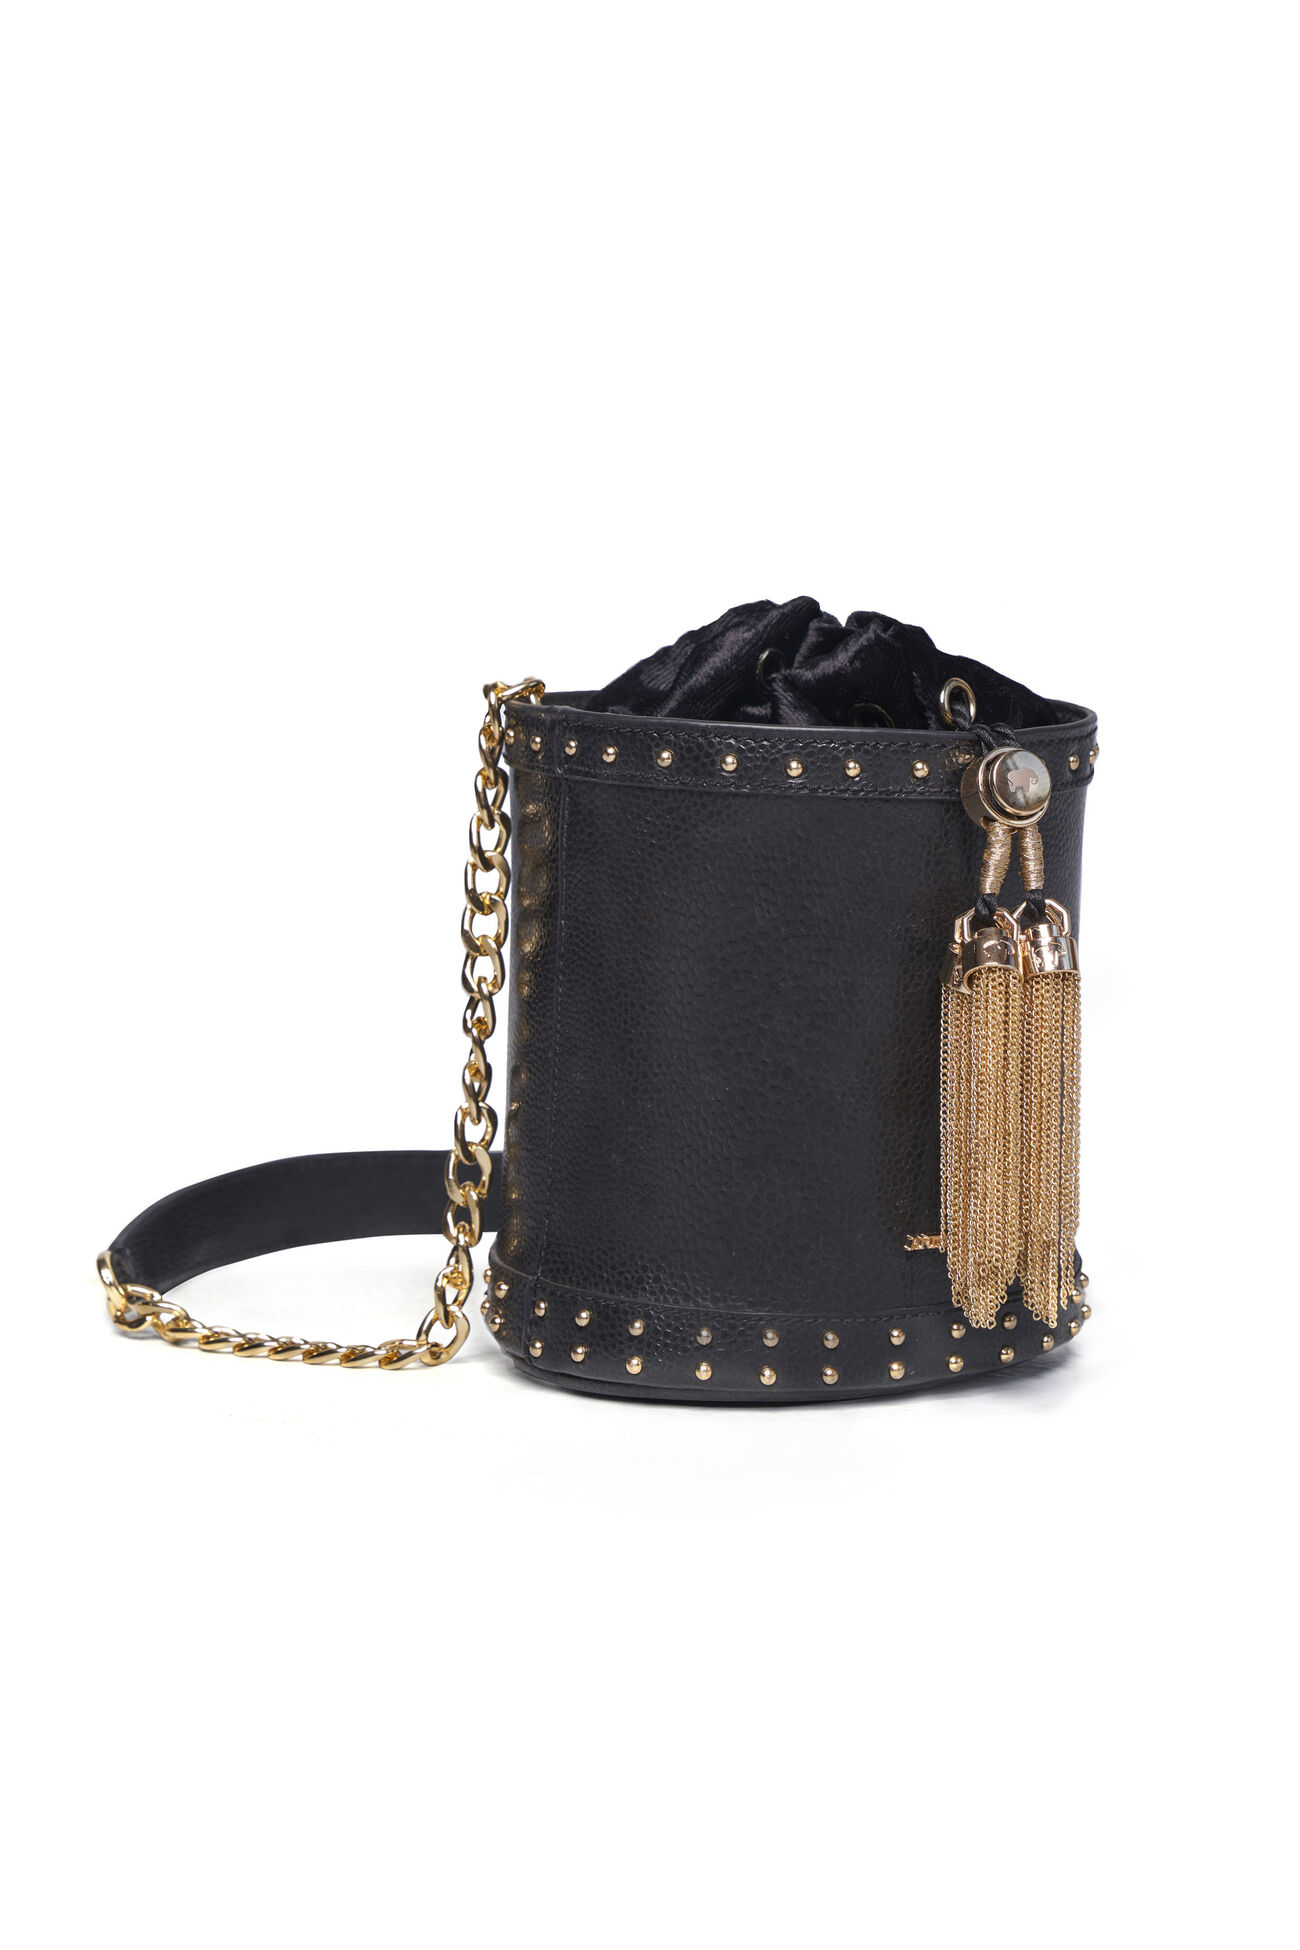 From The Wilderness Bucket Bag - Nocturnal Black, Black, image 7